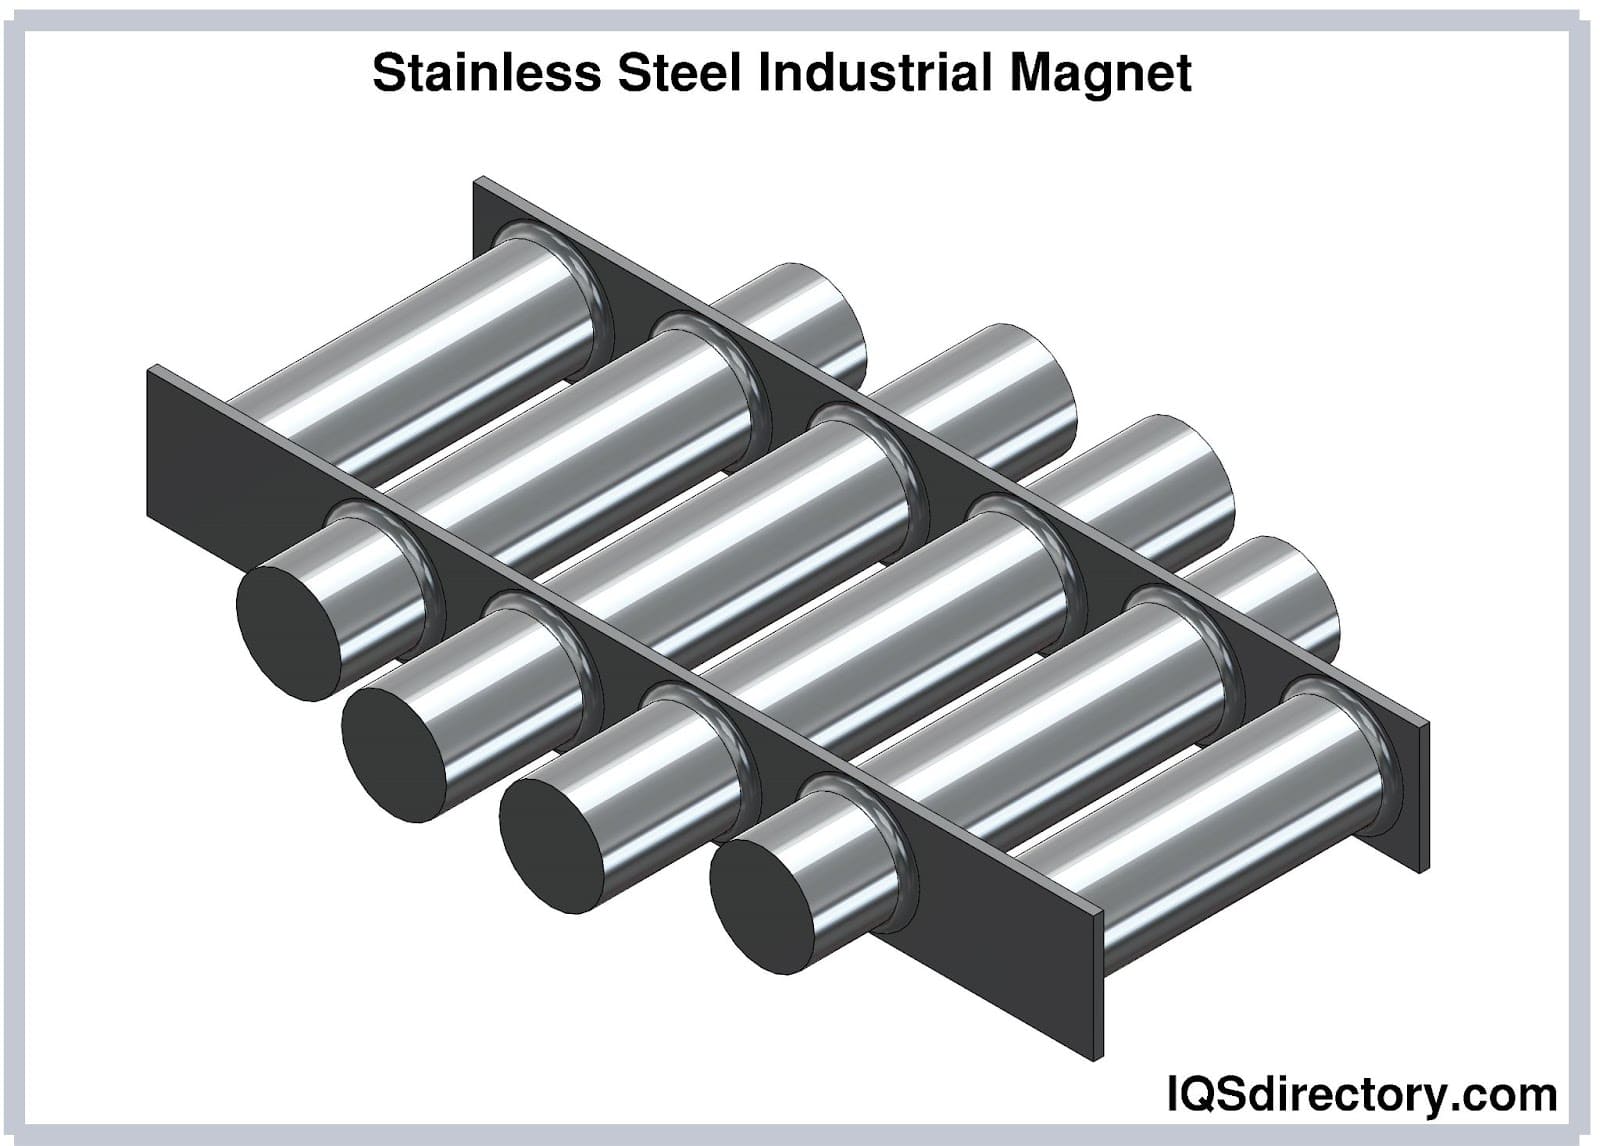 Stainless Steel Industrial Magnet